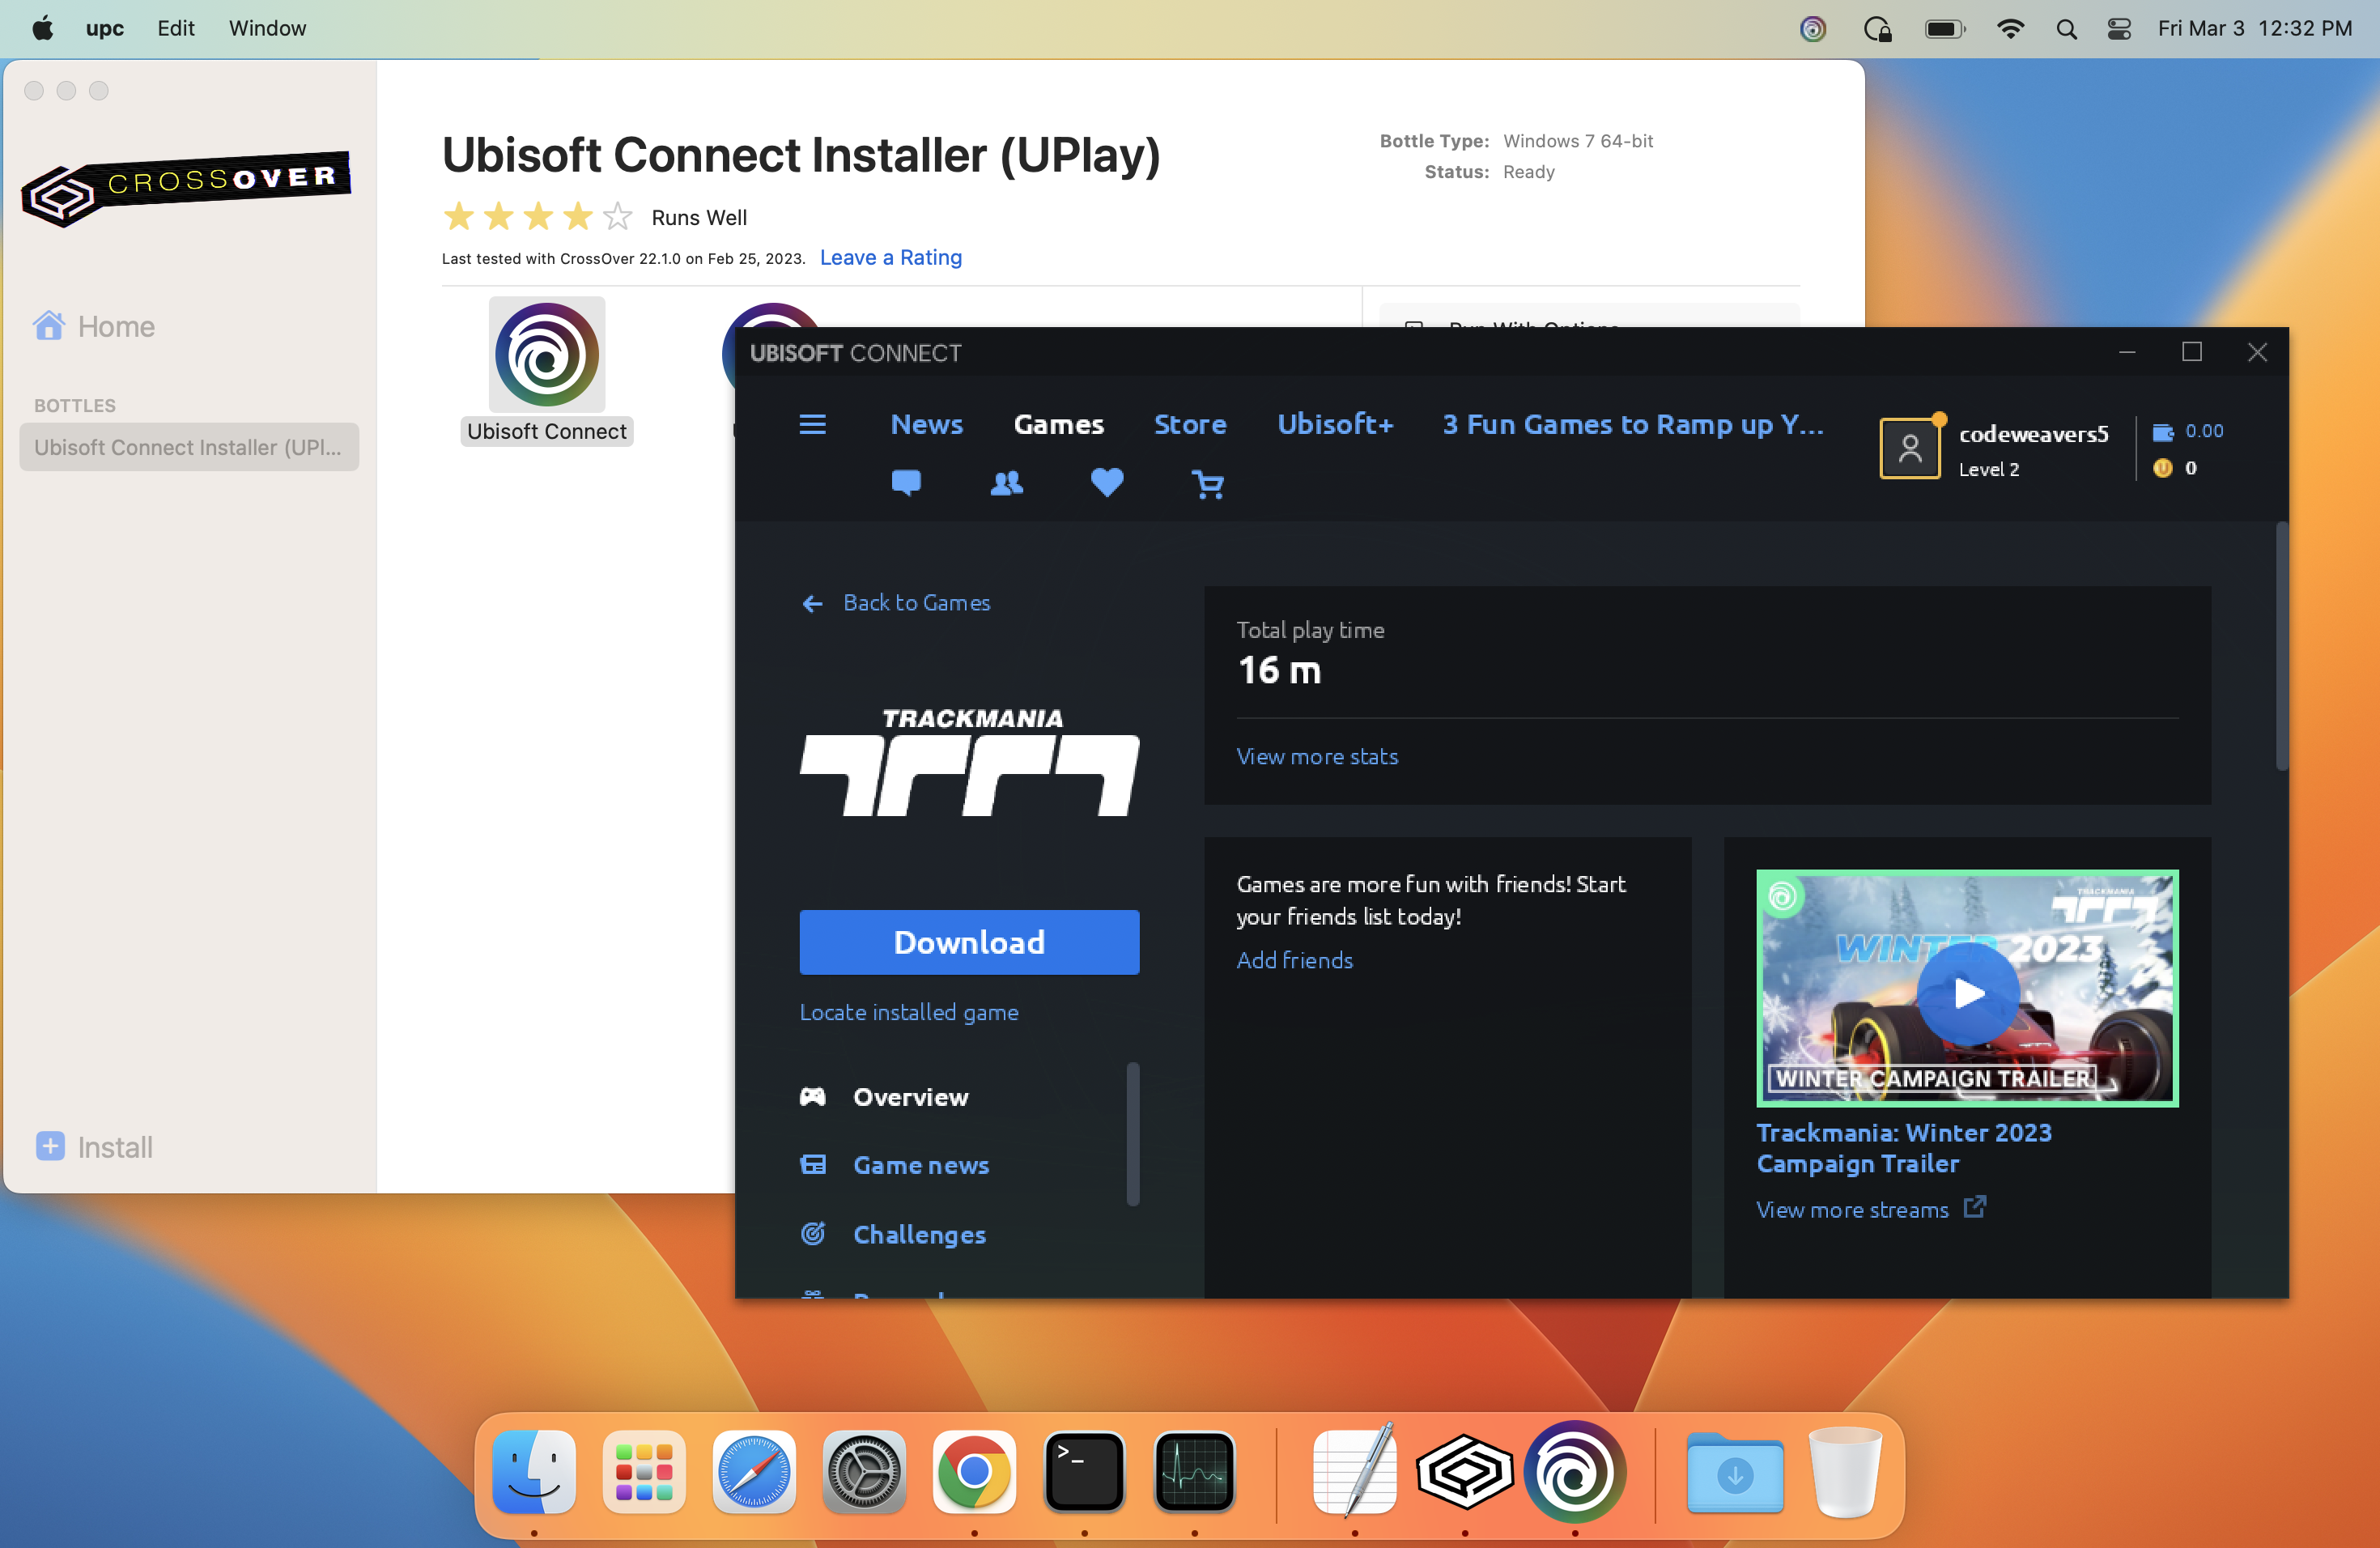 How to Install Steam on Mac 